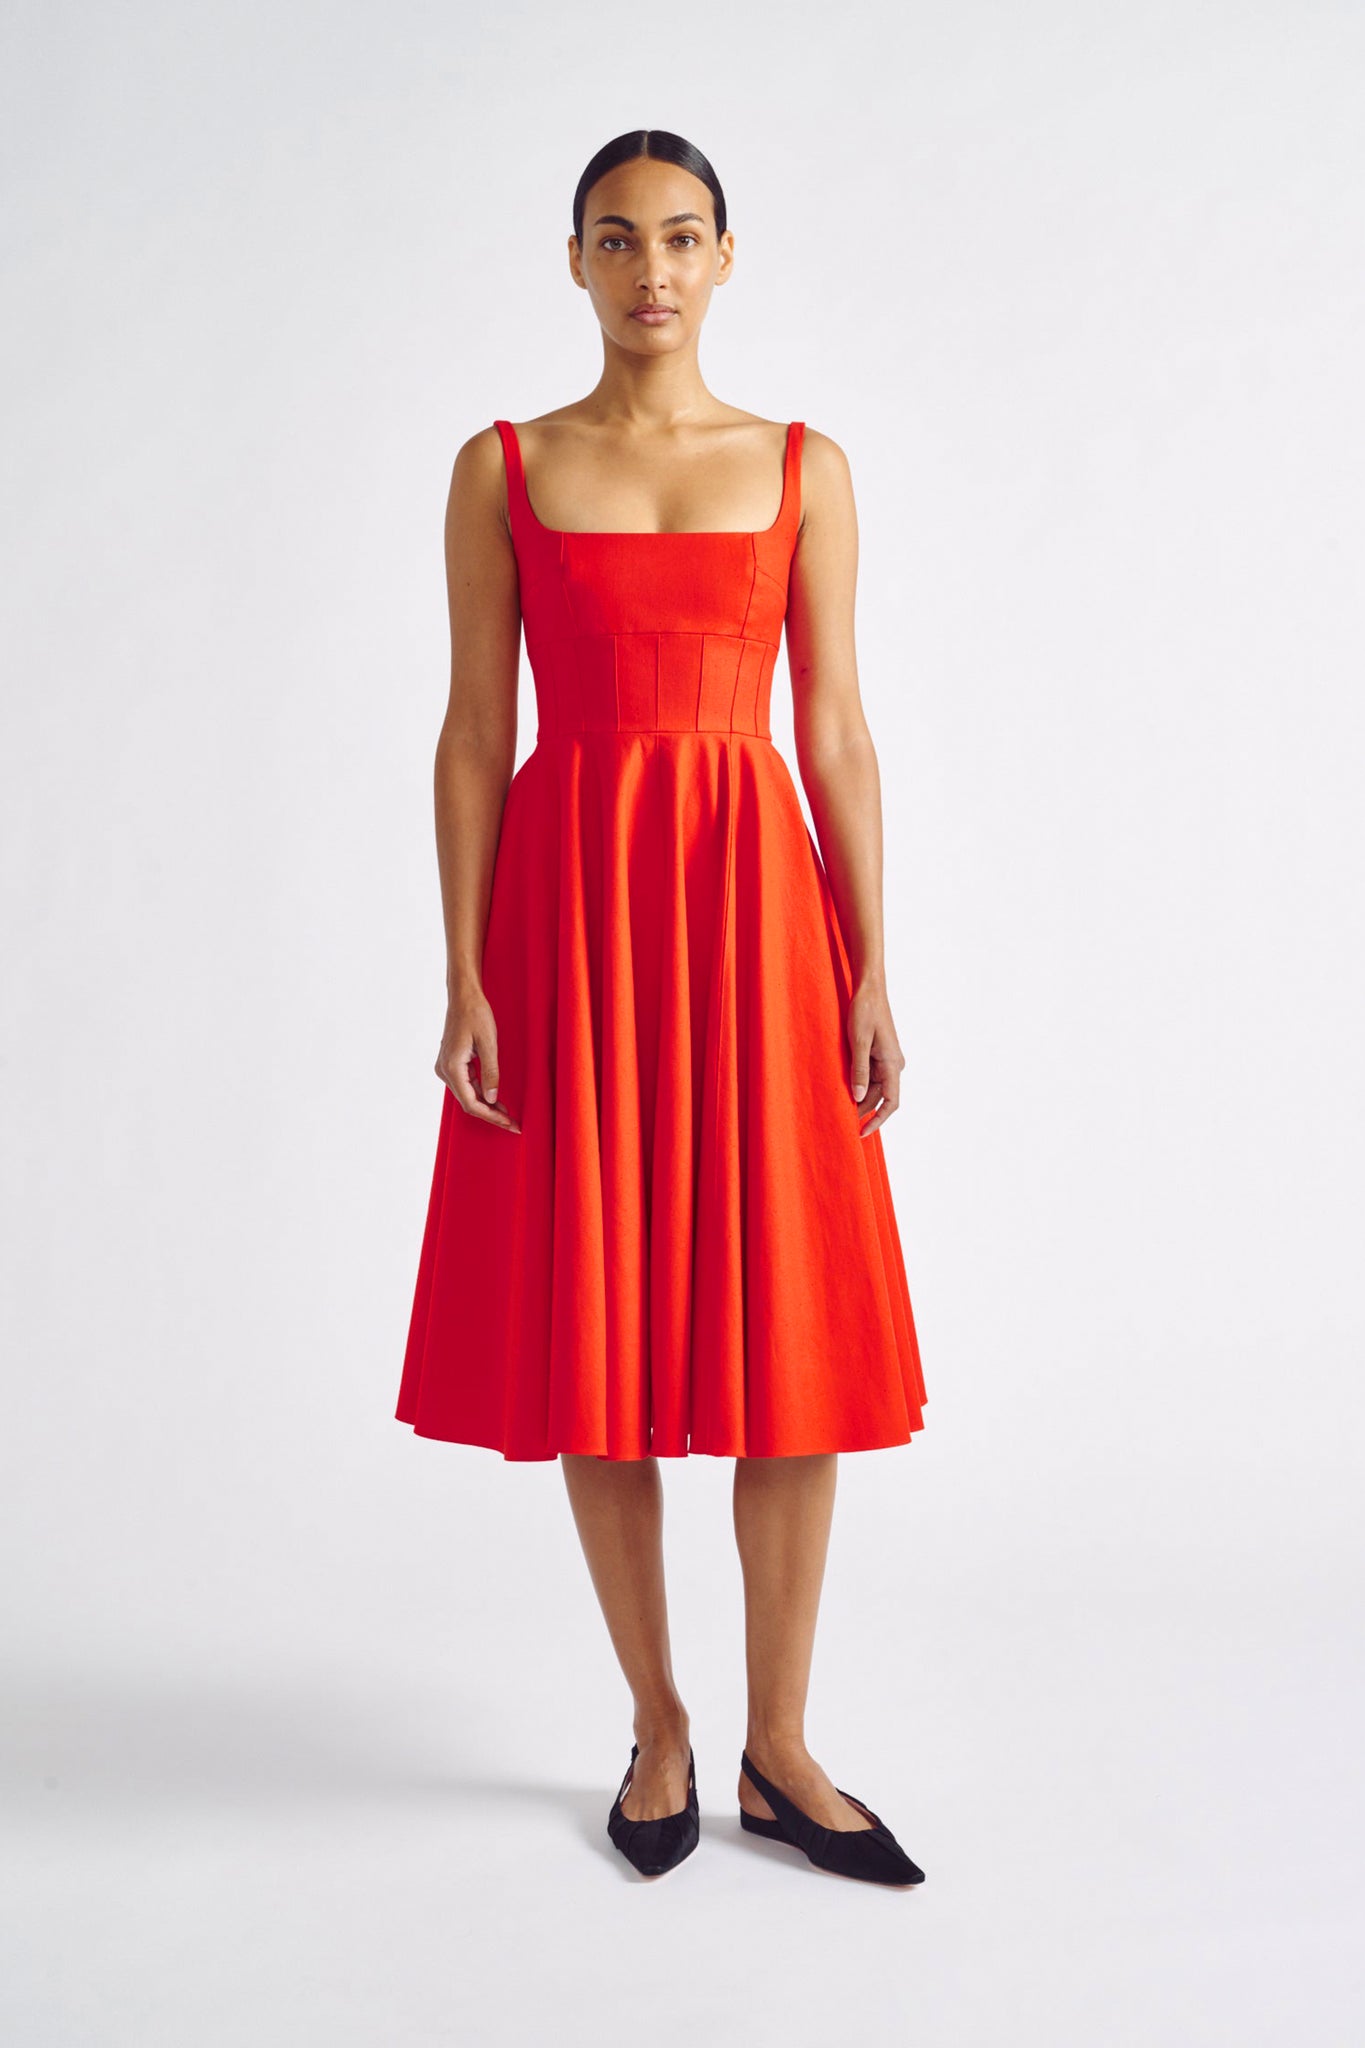 Monetta Dress | Red Fit and Flare Dress in Malfile Cotton | Emilia ...